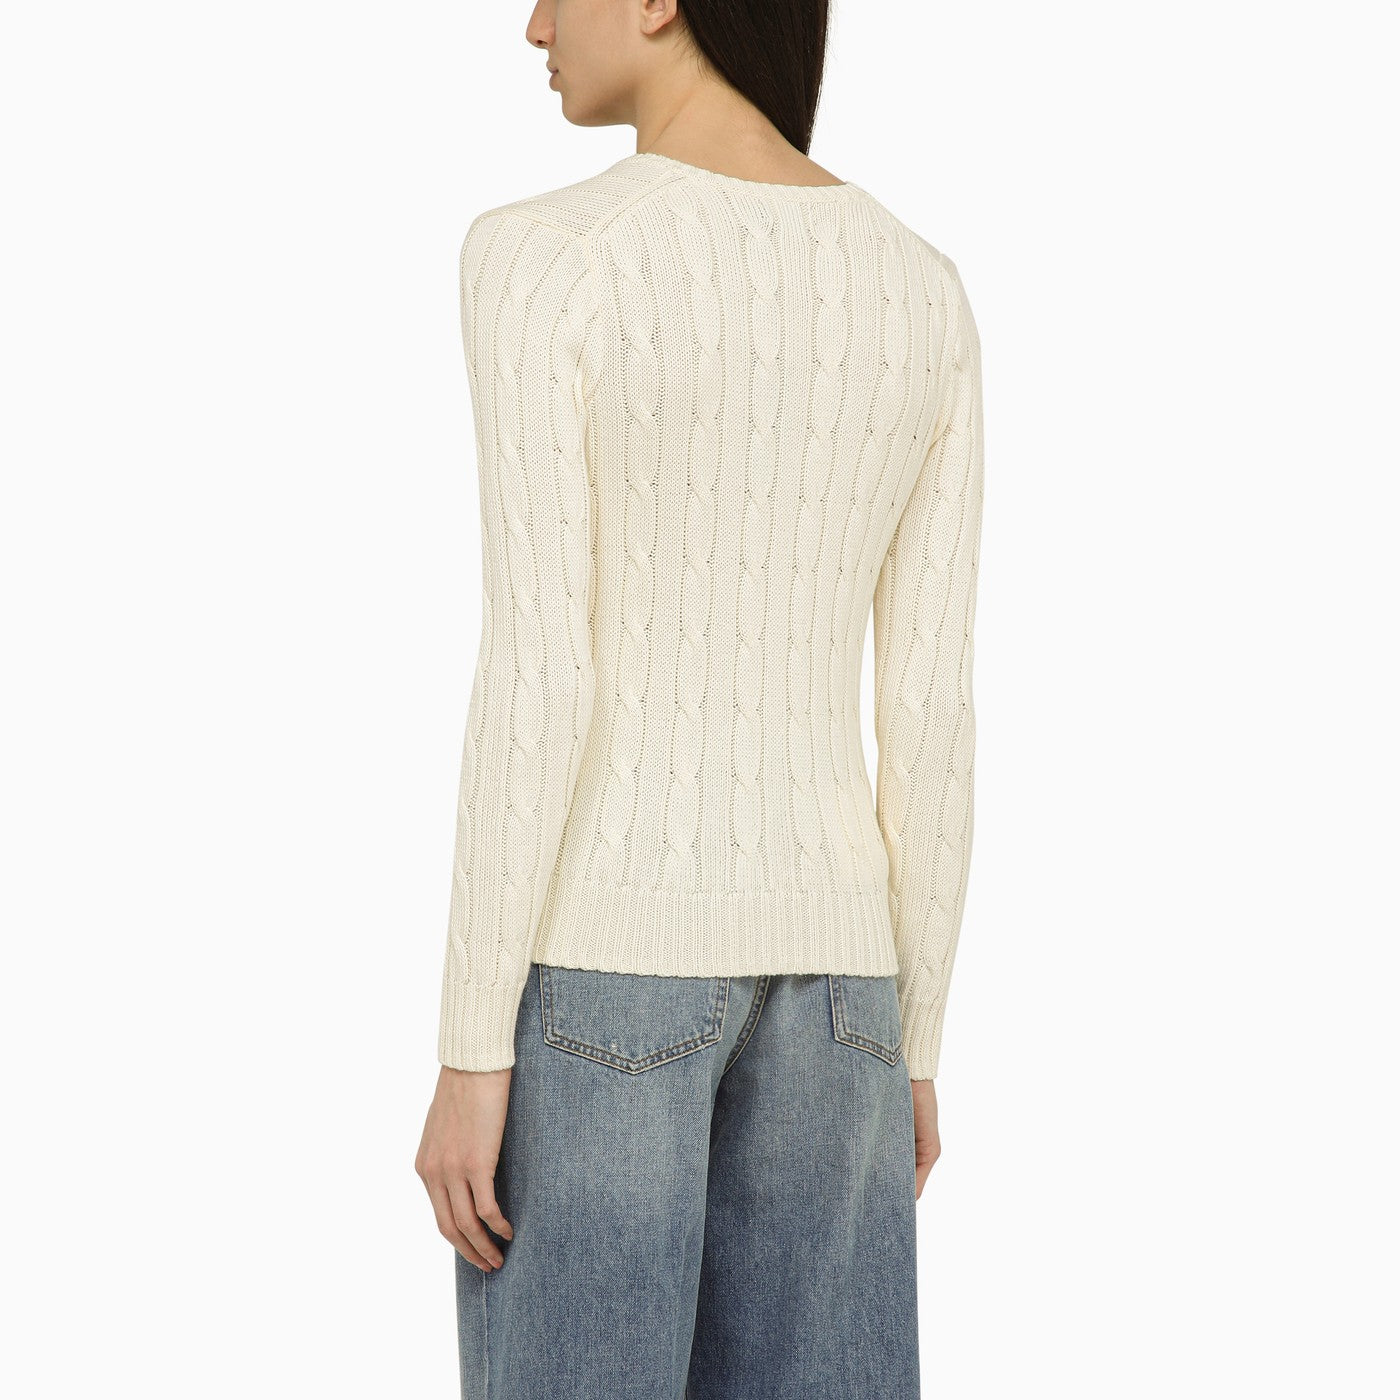 Ralph Lauren Women's Cable-Knit Wool-Cashmere Sweater - Size M in Authentic Cream